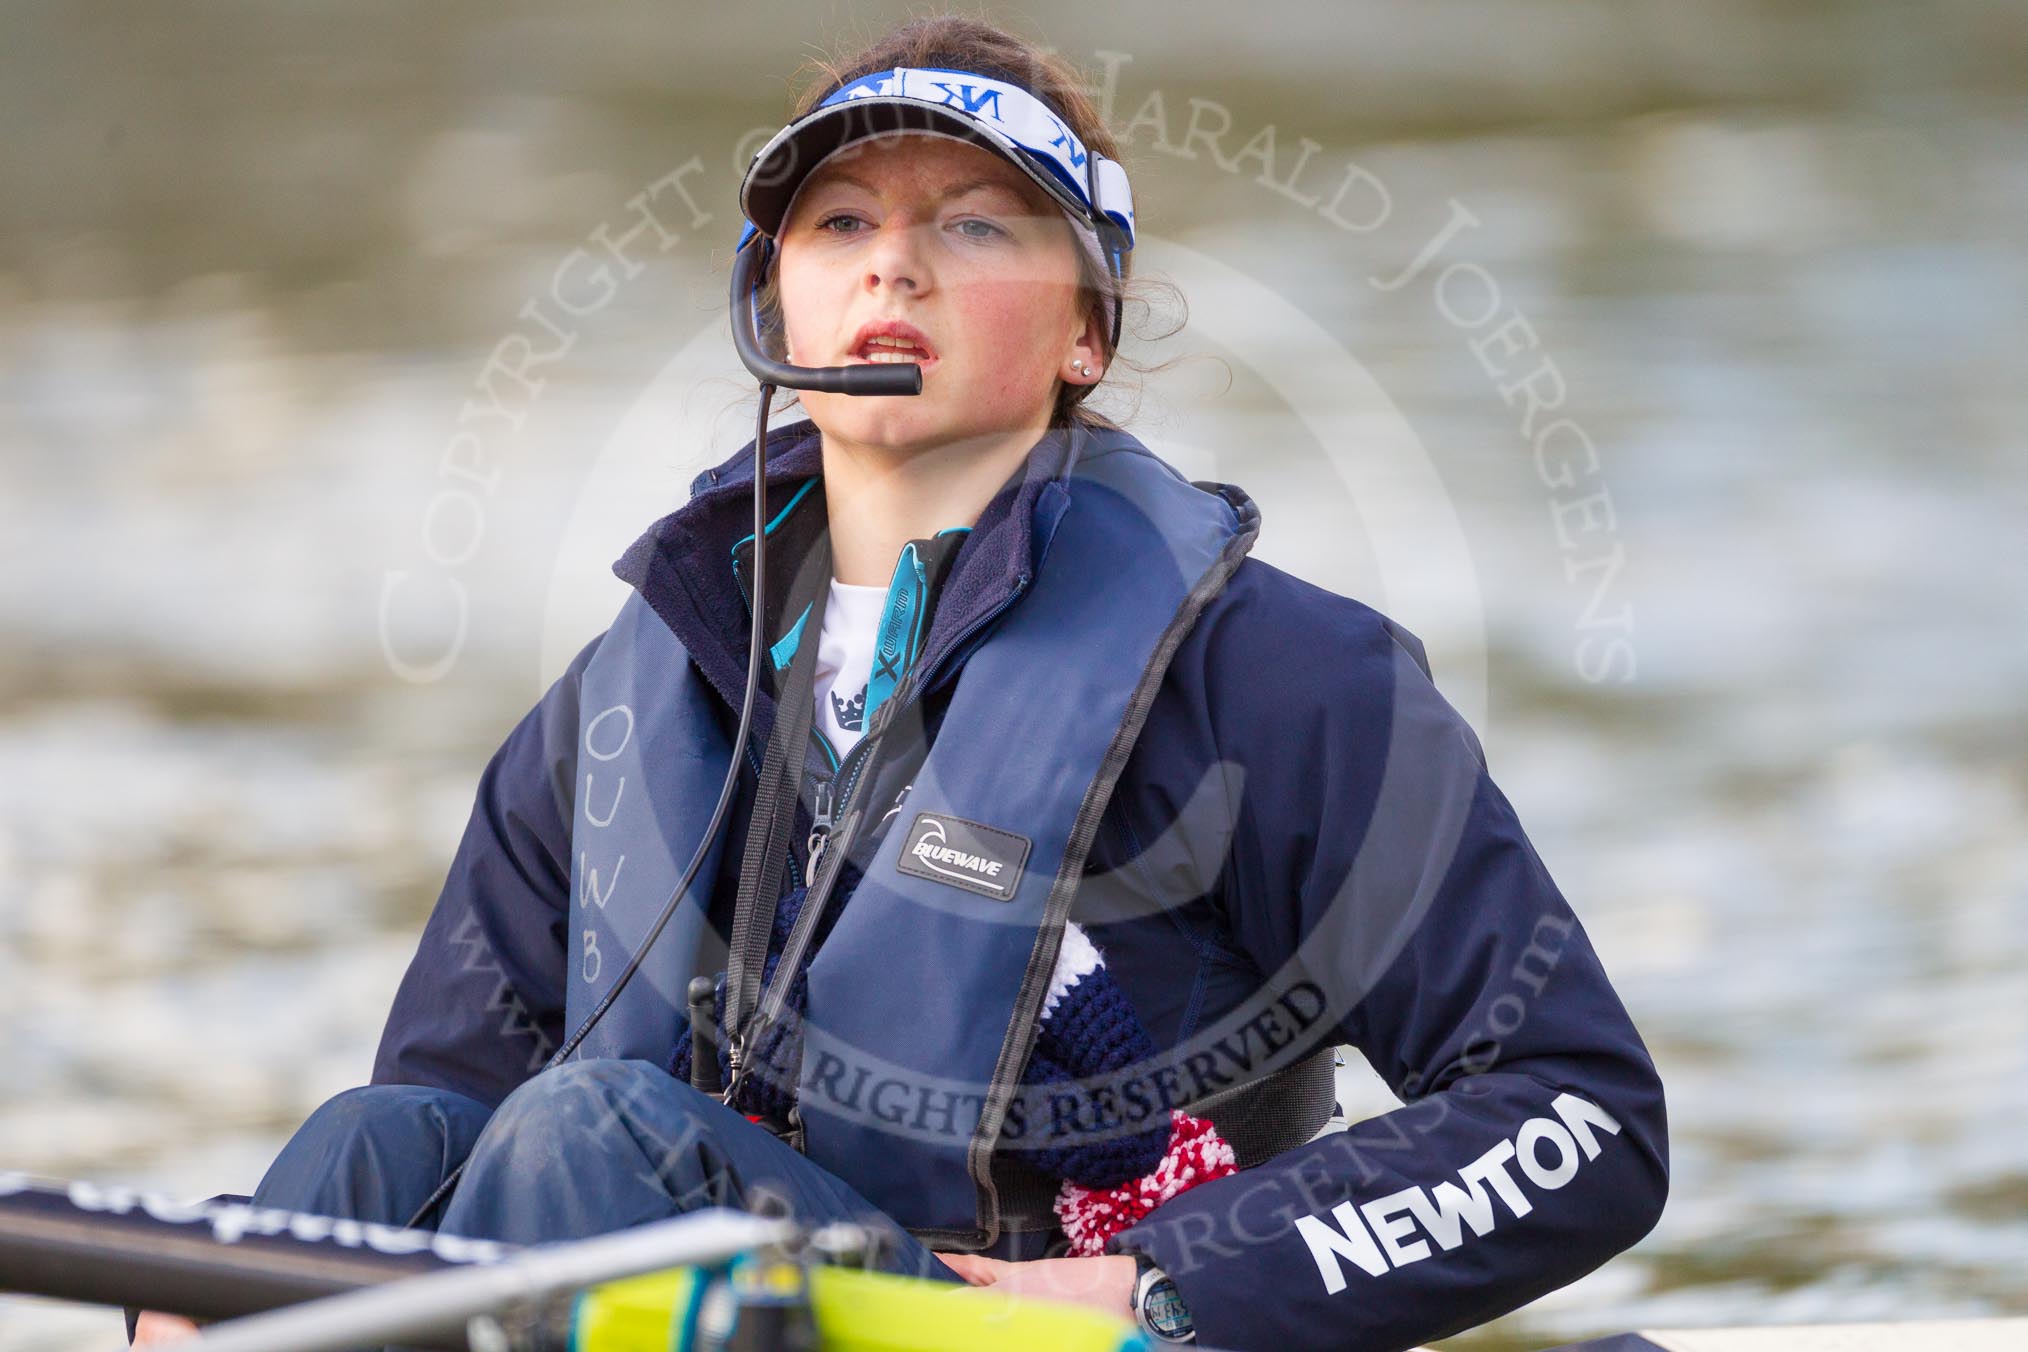 The Boat Race season 2015: OUWBC training Wallingford.

Wallingford,

United Kingdom,
on 04 March 2015 at 16:42, image #225